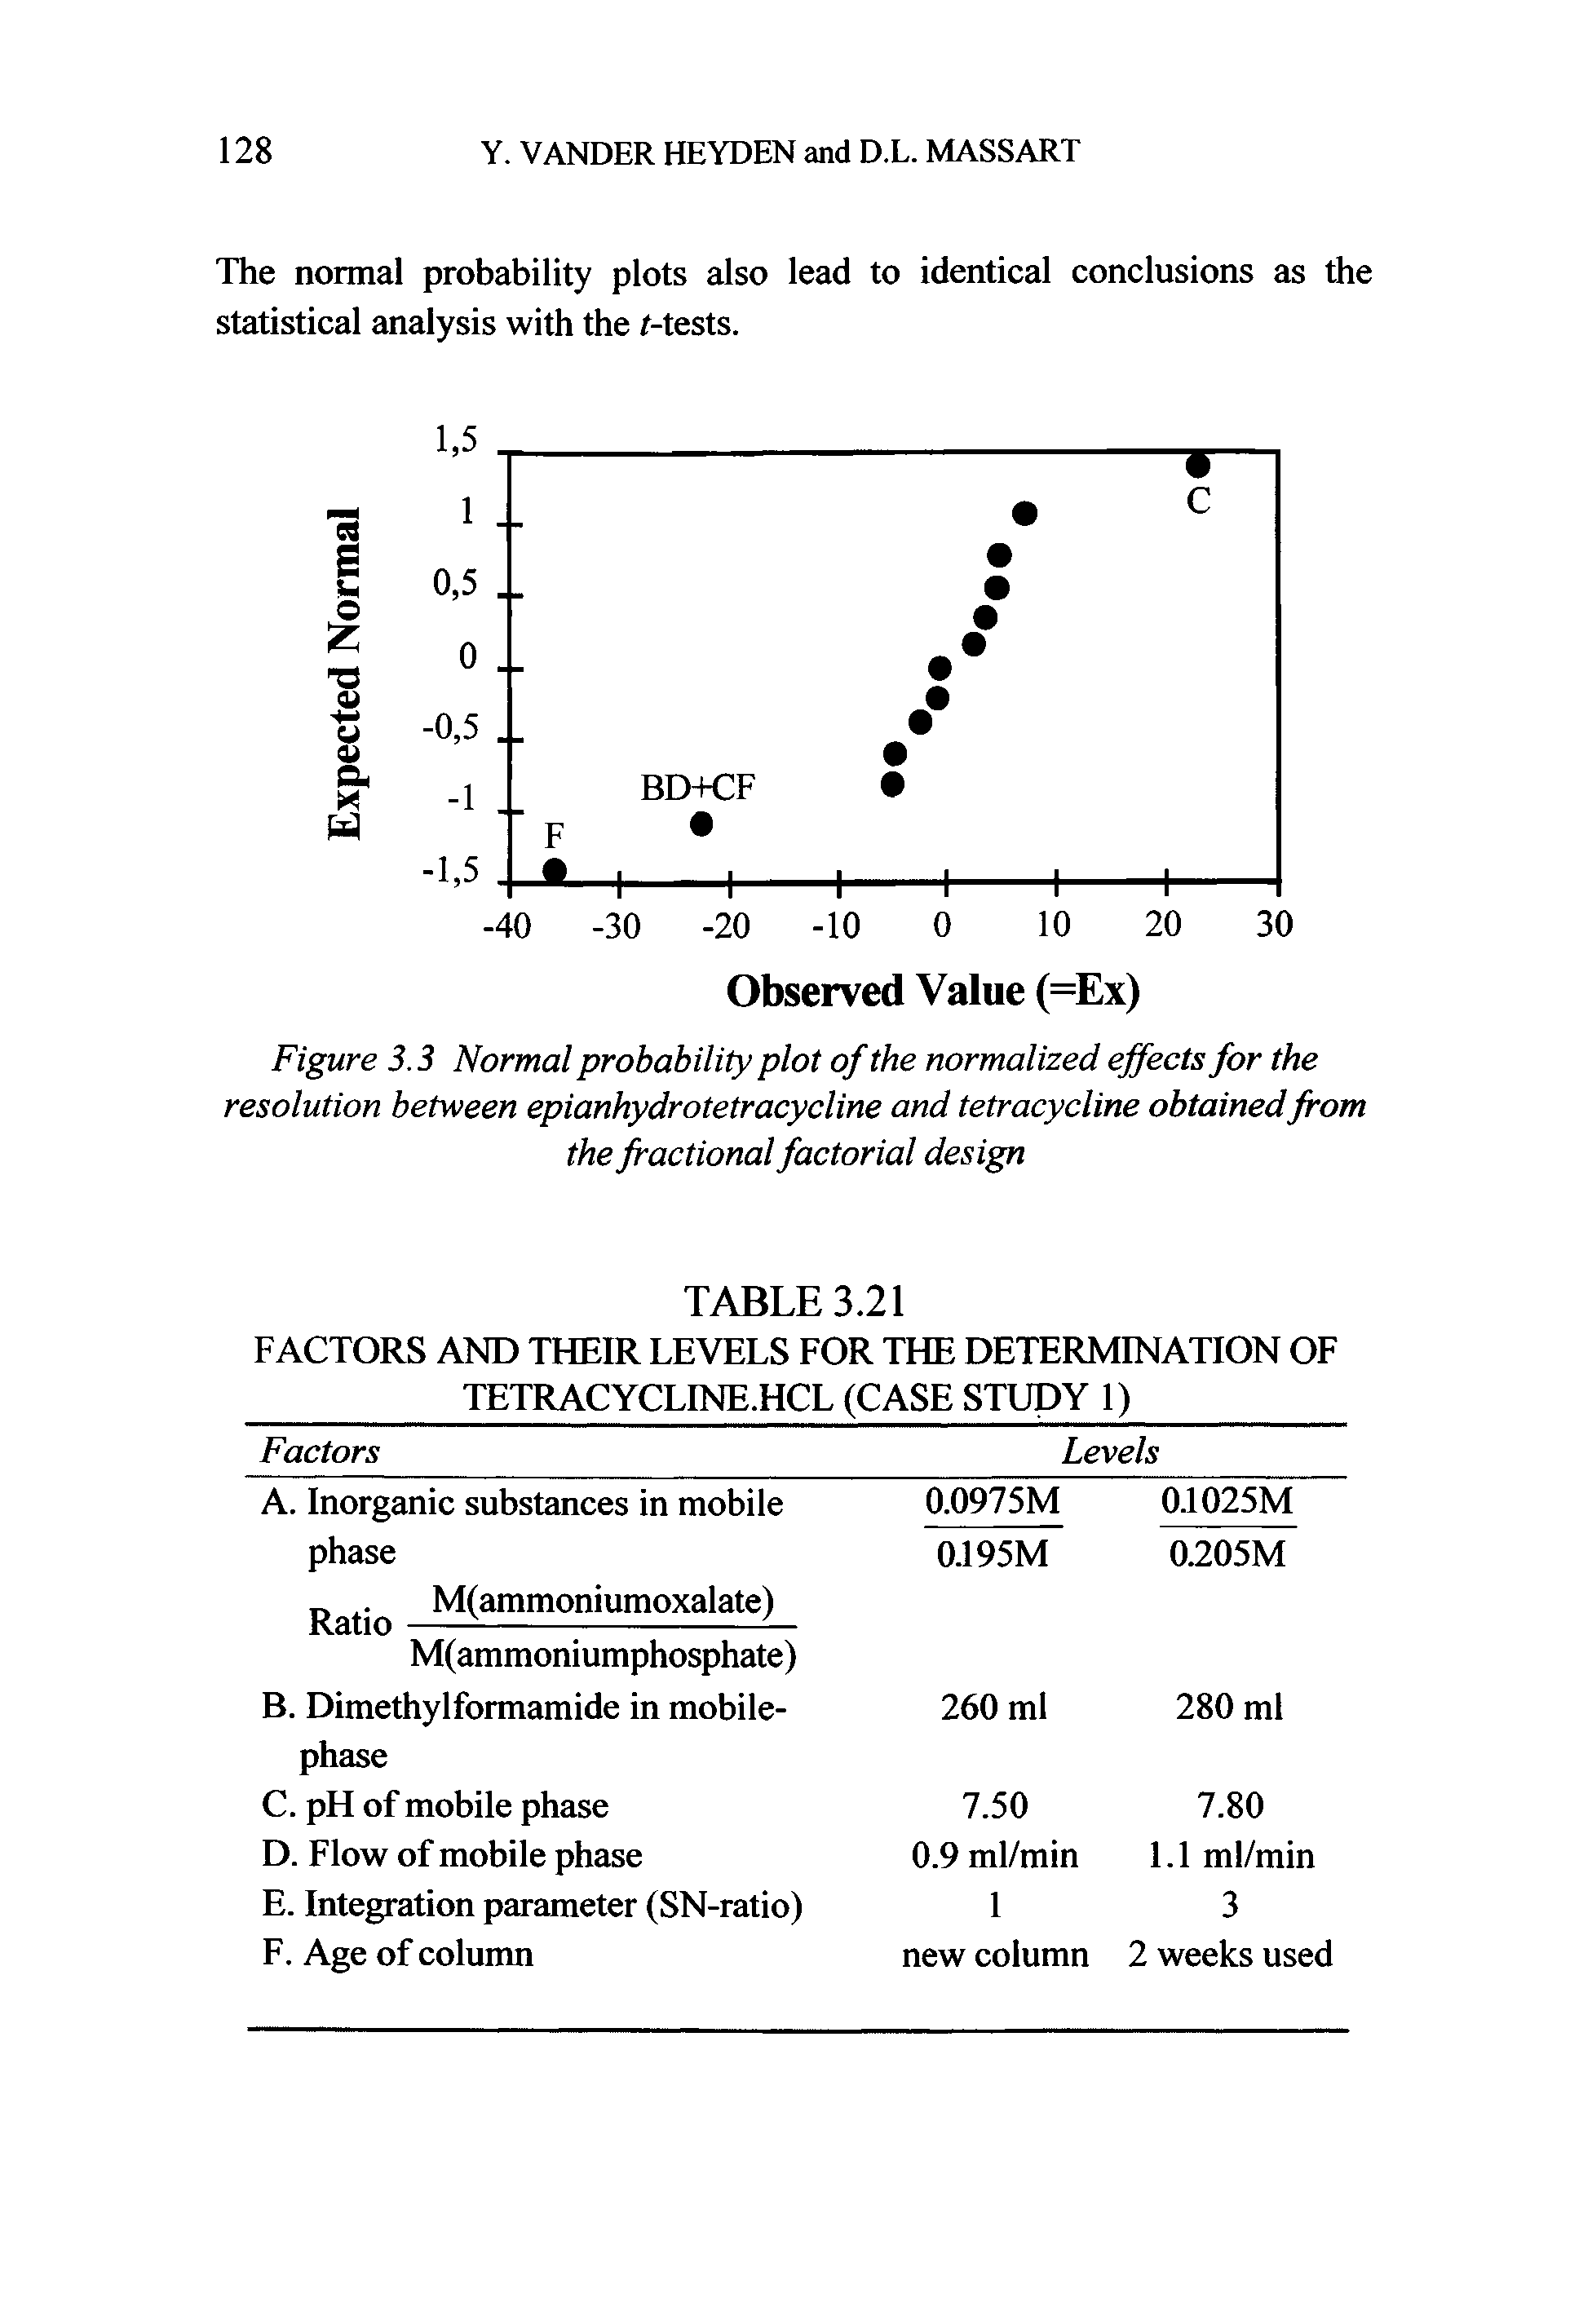 Figure 3.3 Normal probability plot of the normalized effects for the resolution between epianhydrotetracycline and tetracycline obtainedfrom the fractional factorial design...